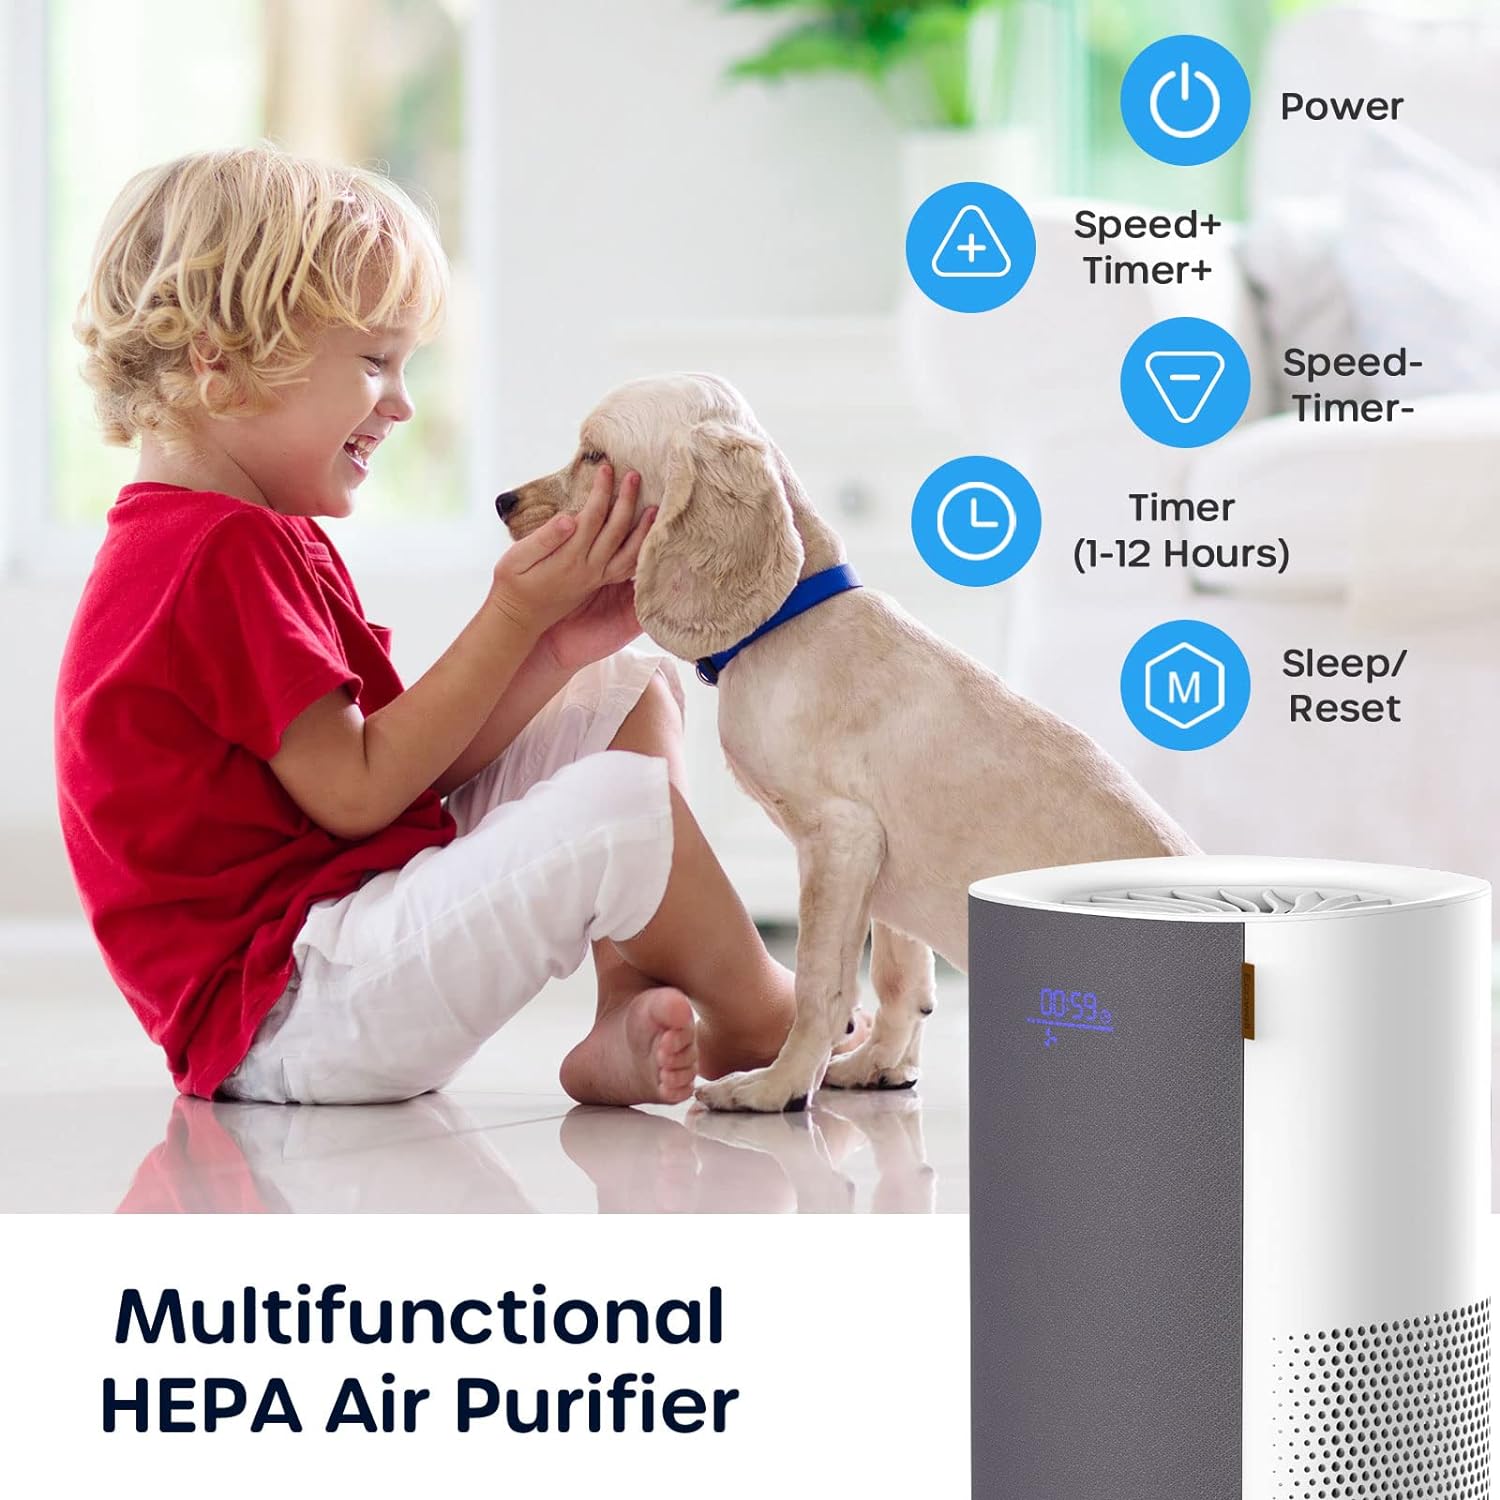 ECOWELL Air Purifiers for Bedroom, Desktop Air Purifier for Home large Room up to 215 sq.ft, H13 True HEPA Filter with Sleep Mode, Ozone Free, Removing 99.97% of Smoke, Dust, Odors, Pet Dander, EPA050